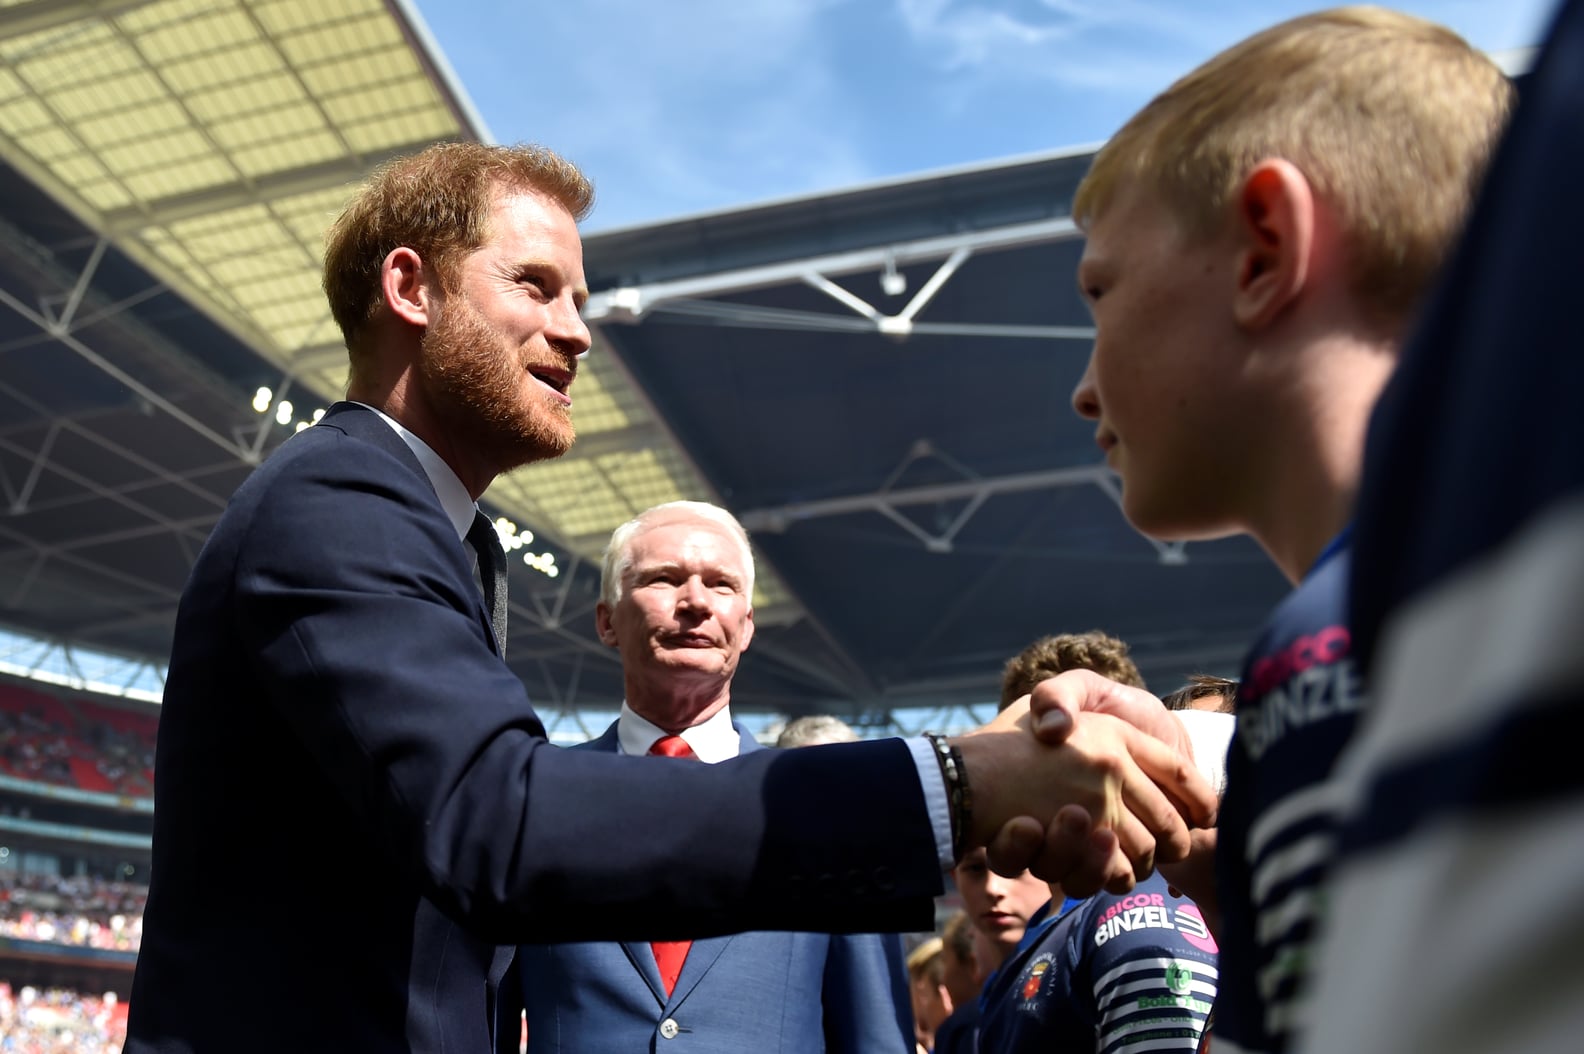 Prince Harry at Rugby League Challenge Final Pictures 2019 | POPSUGAR ...